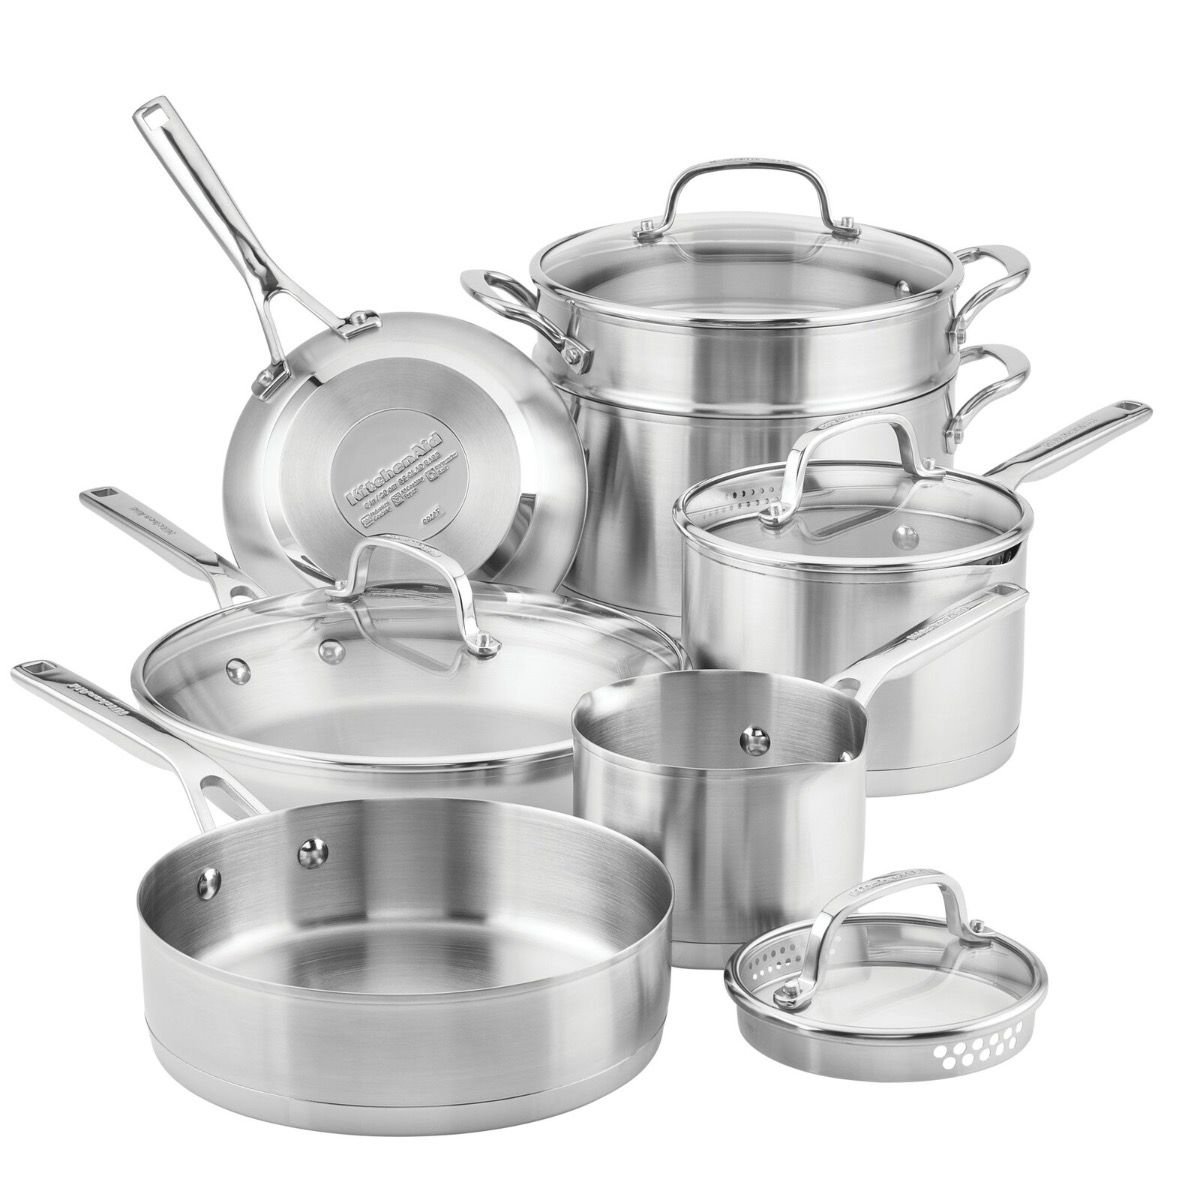 11-Piece Stainless Steel 3-Ply Base Cookware Set